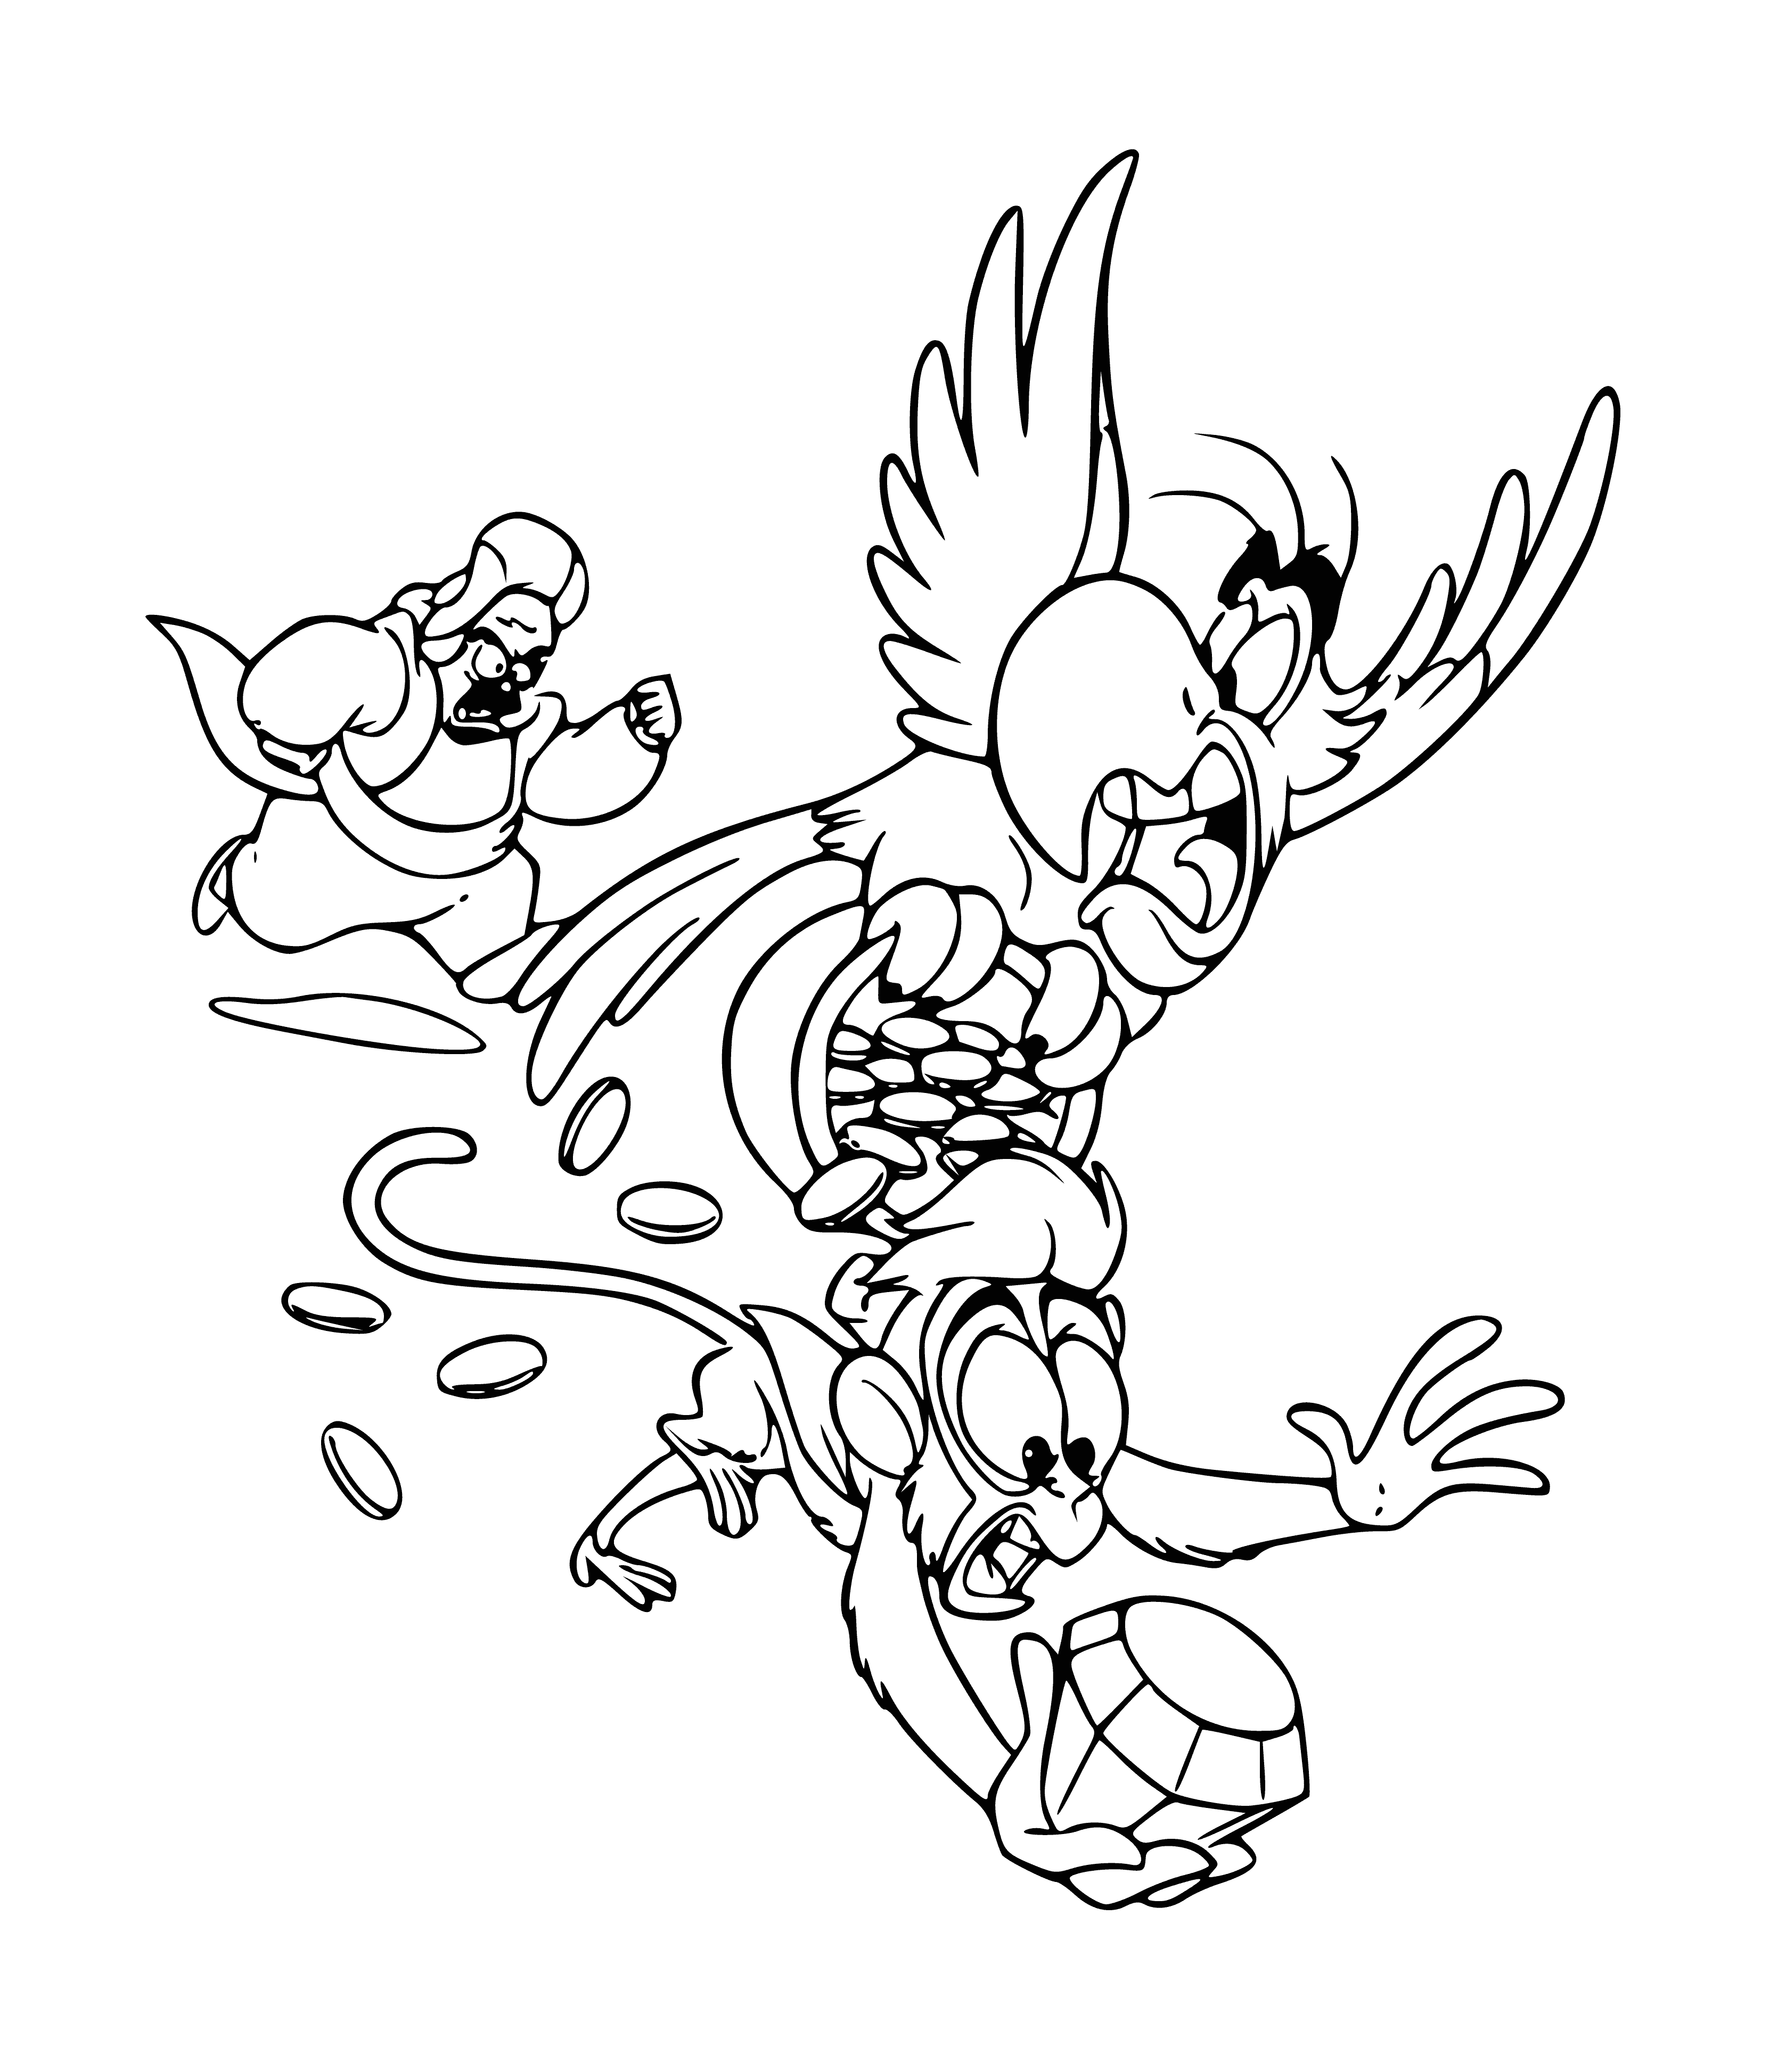 Iago and Abu with a diamond coloring page